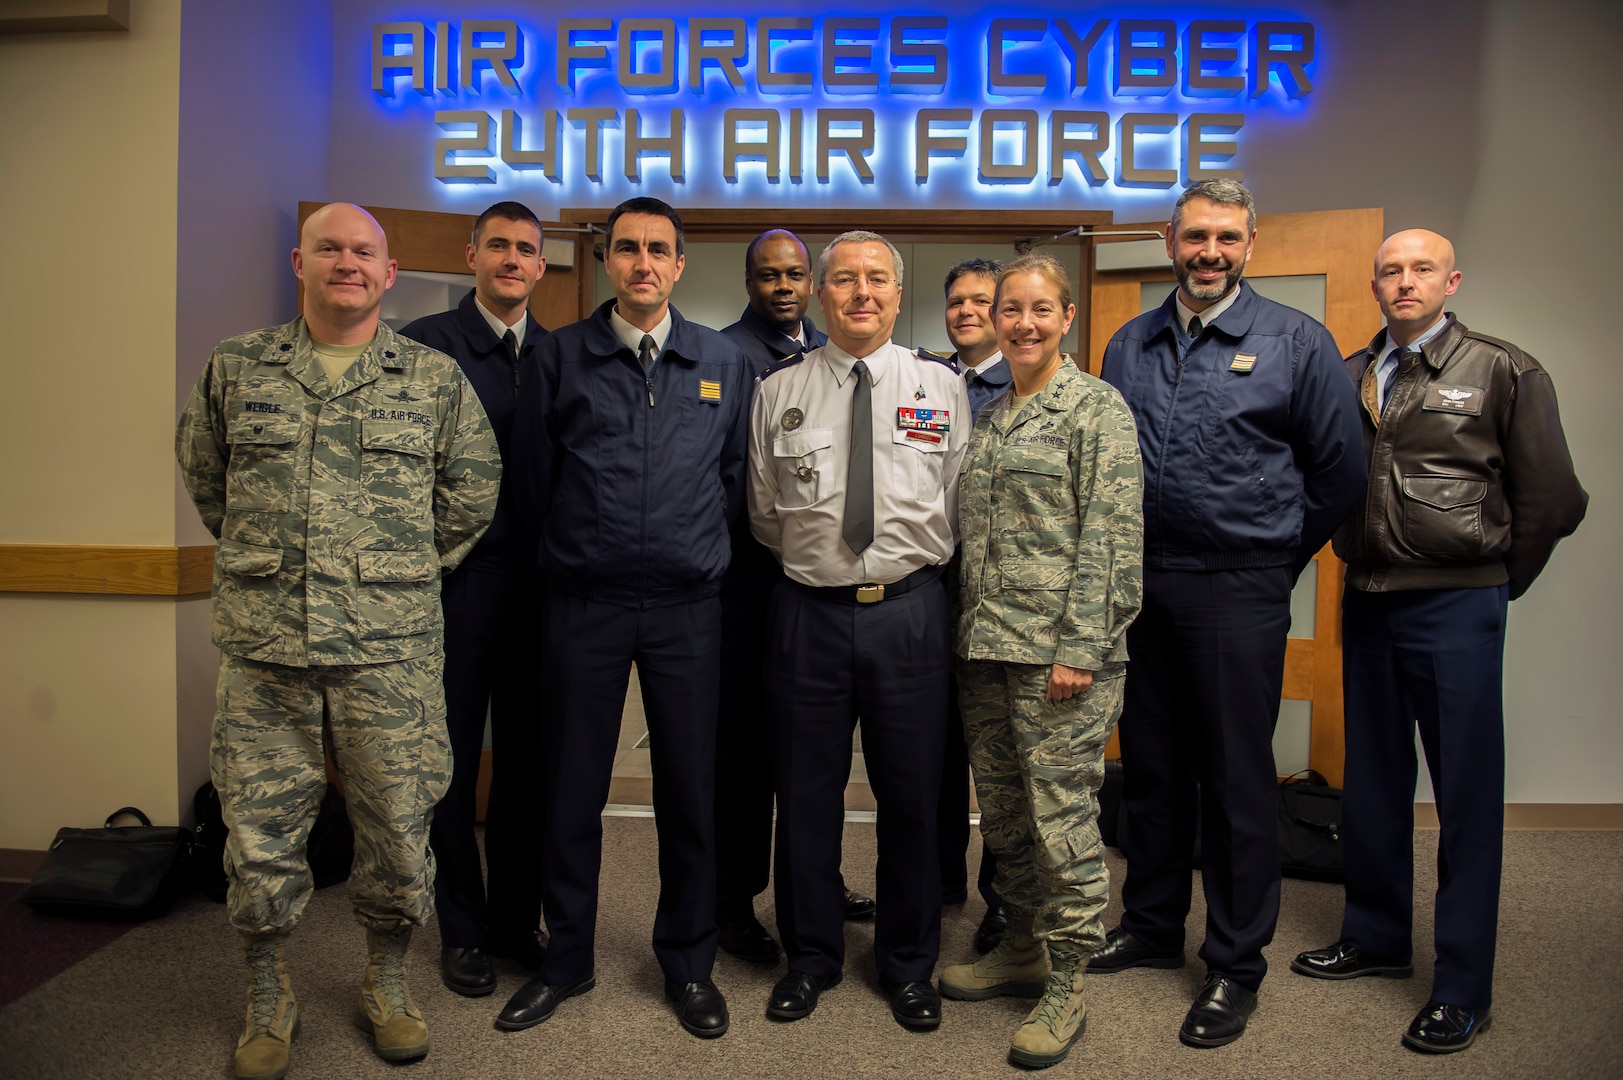 U.S. Air Force Maj. Gen. Shelia Zuehlke (center-right), mobilization assistant to the commander, 24th Air Force and Air Forces Cyber Command (AFCYBER), and French Air Force Brig. Gen. Thierry Combel (center), Deputy Director General of Employment and Training-Air Force Human Resources, stand with other members of a cybersecurity delegation during a visit to Headquarters, 24AF - AFCYBER, Joint Base San Antonio - Lackland, Texas, Jan 13. The delegation visited to discuss how the U.S. and French Air Force’s approach cyber organization, training, and exercise participation as well as to facilitate future partnerships and engagements.. (U.S. Air Force photo by Master Sgt. Luke P. Thelen/Released)